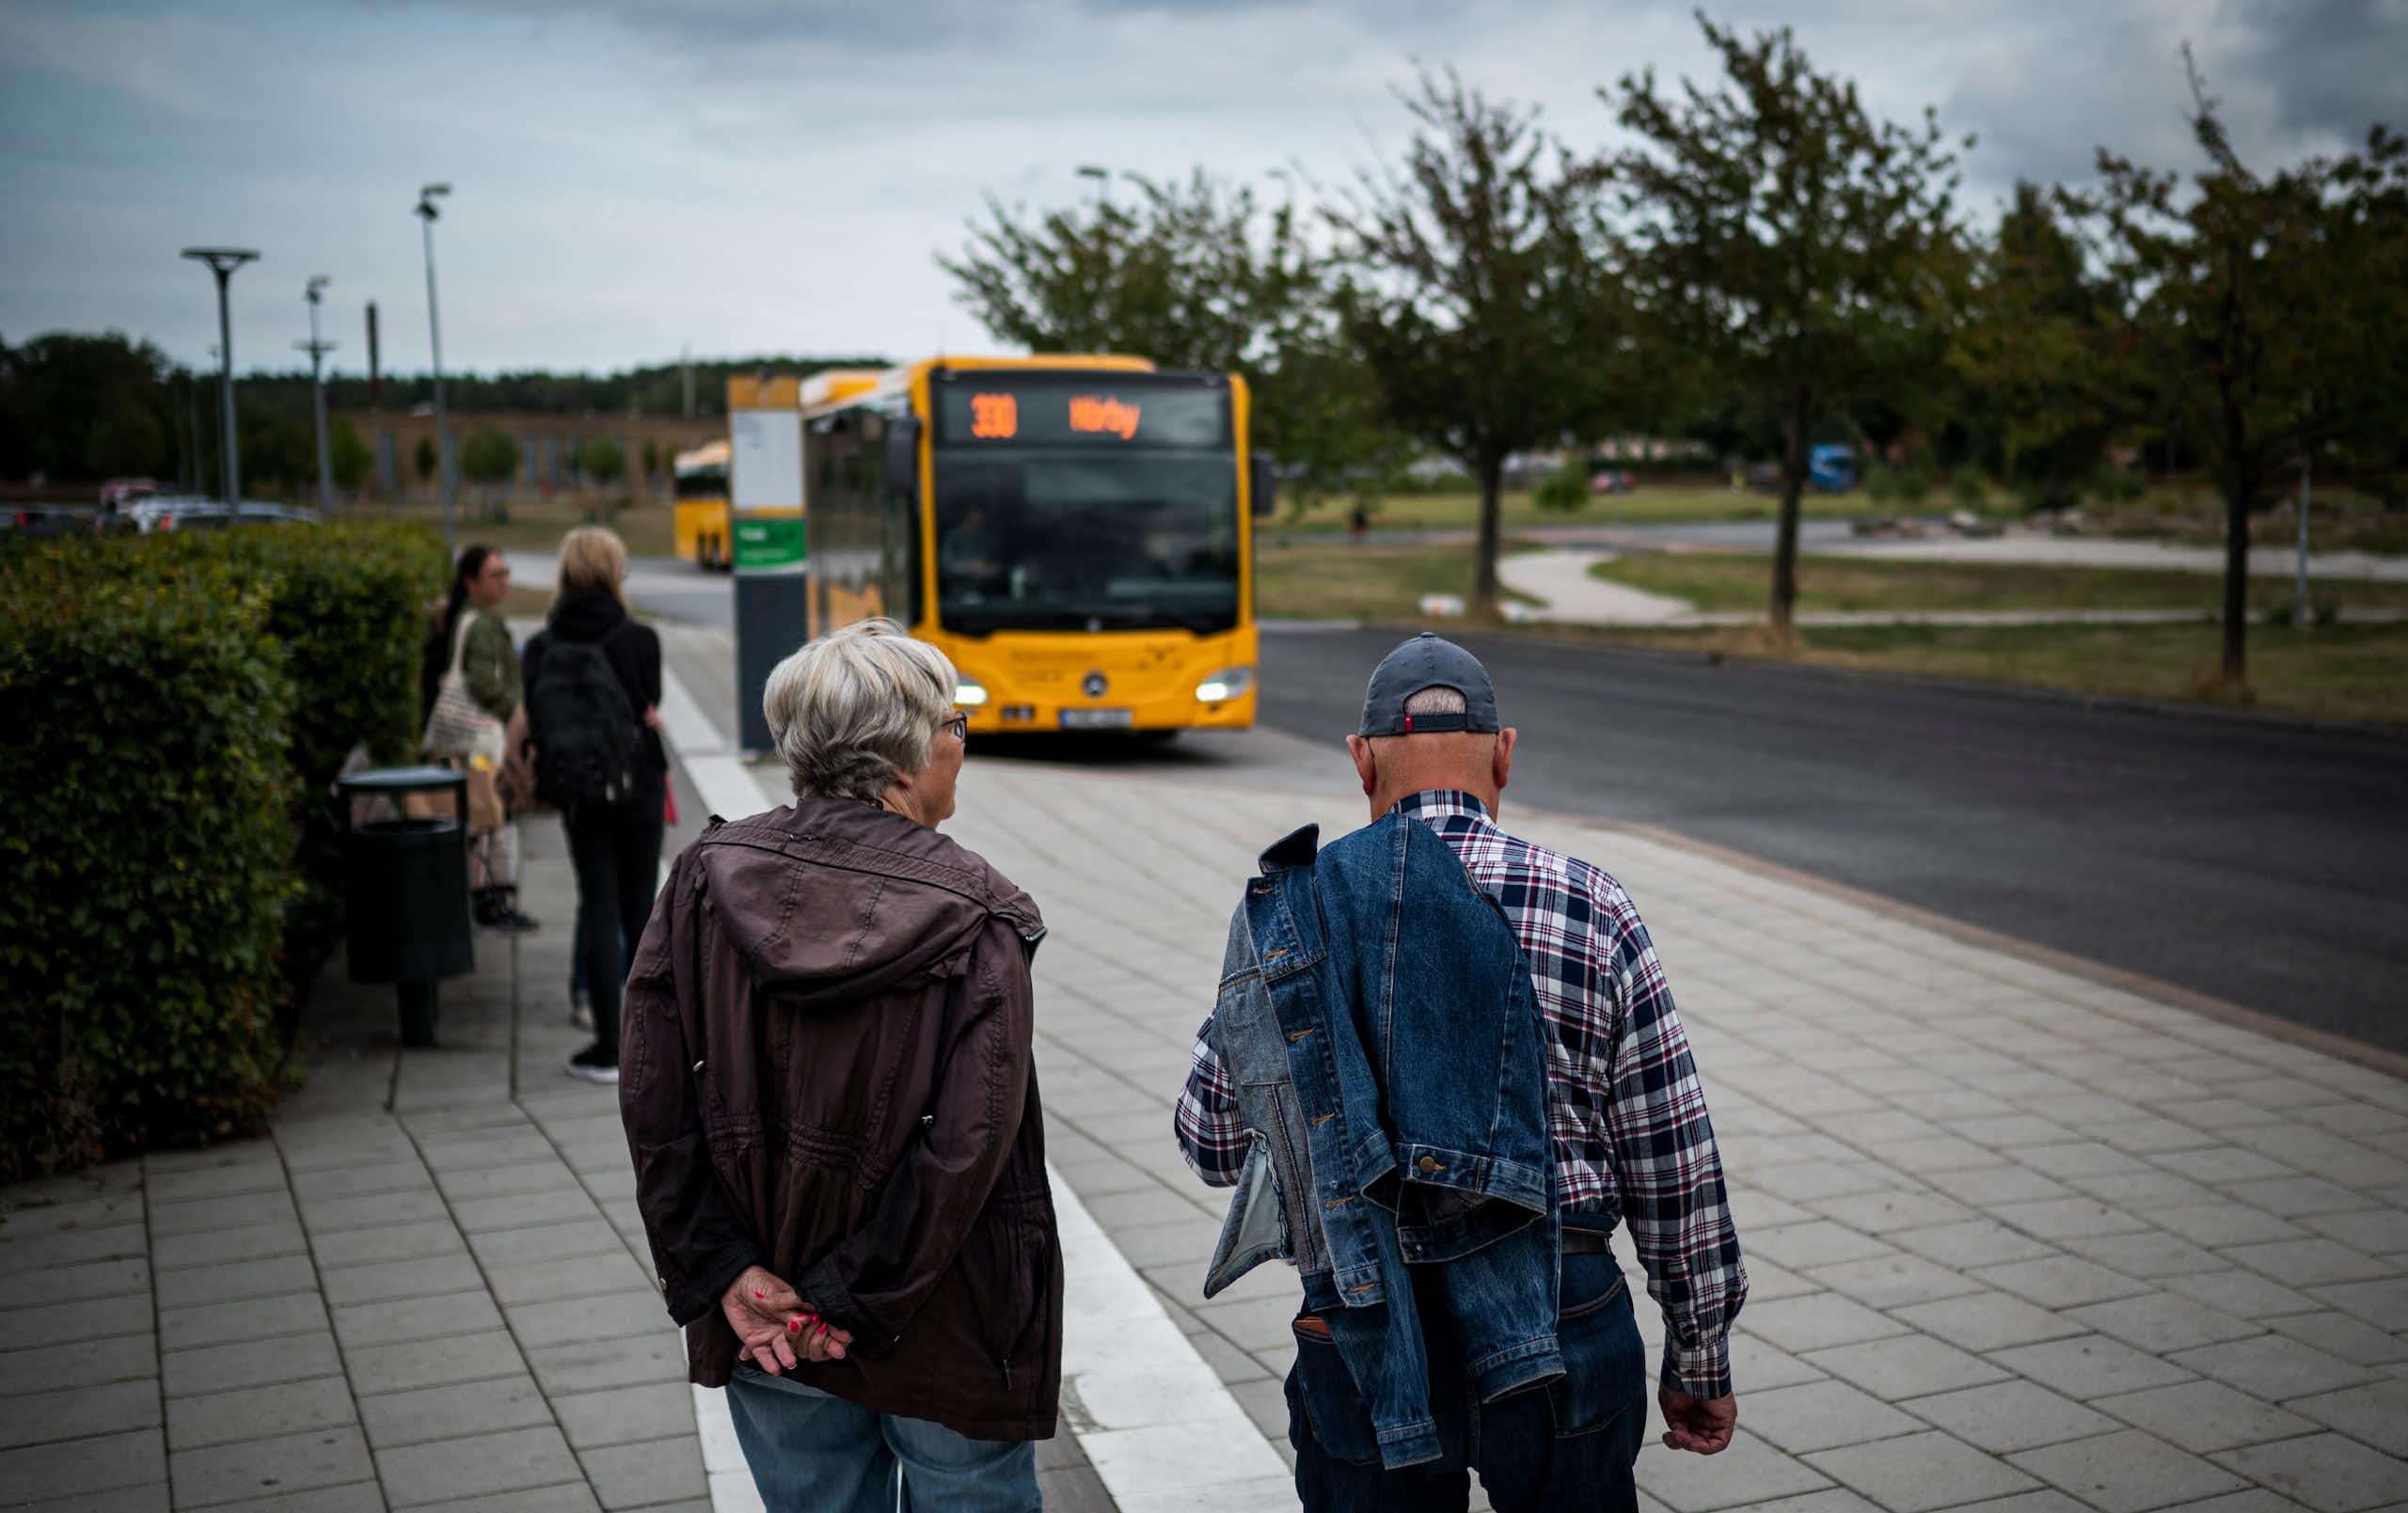 Two older people stand on the street as a bus approaches.